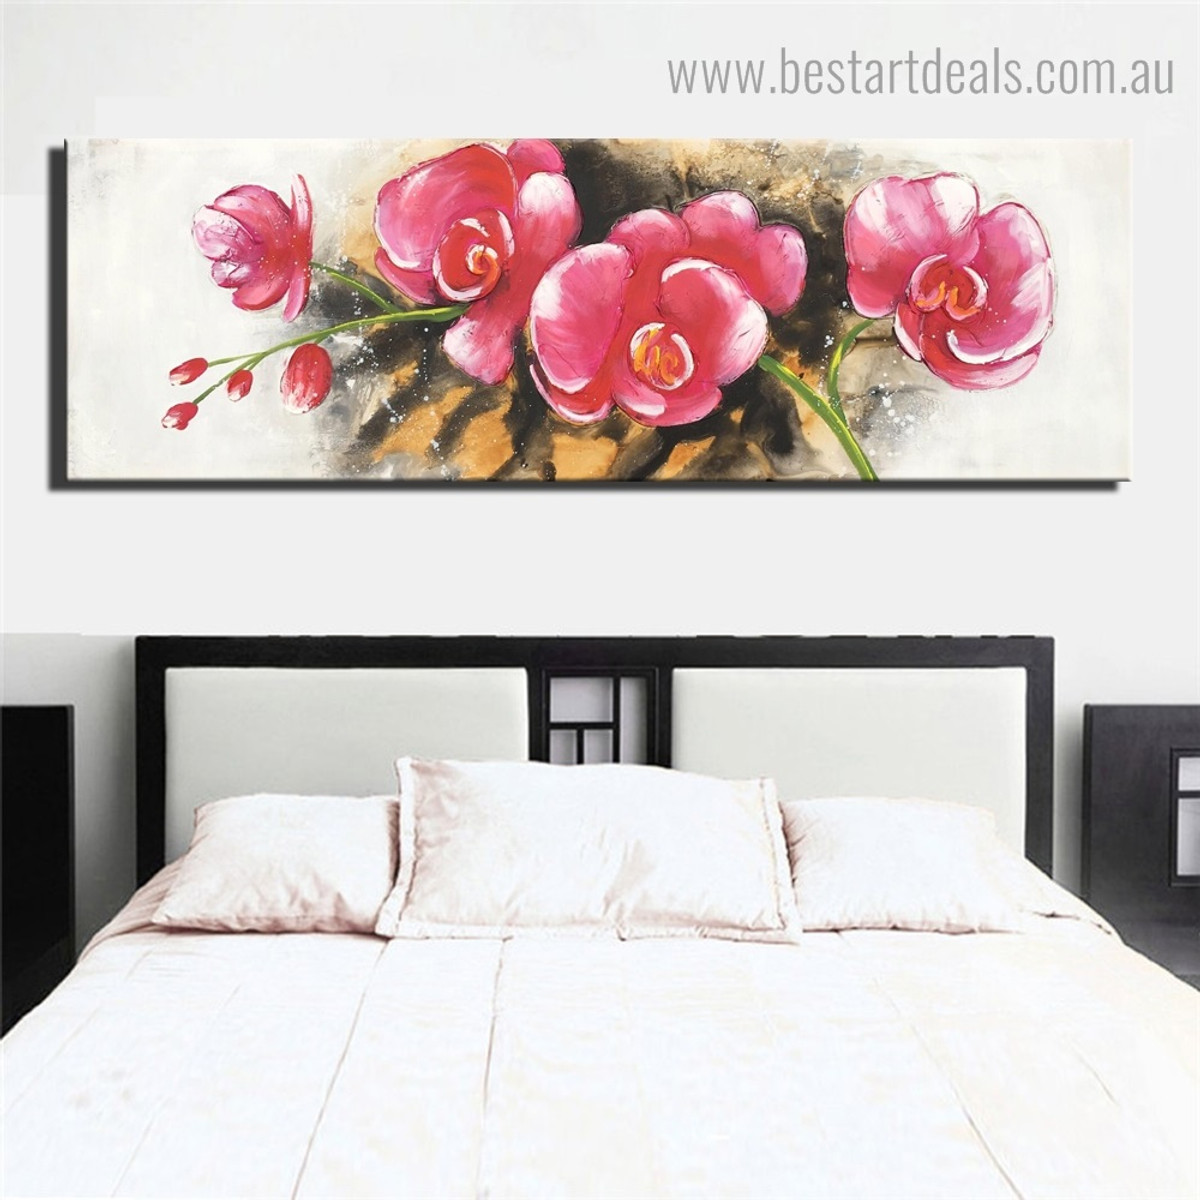 Japanese Camellia Abstract Floral Framed Artwork Image Canvas Print for Room Wall Onlay